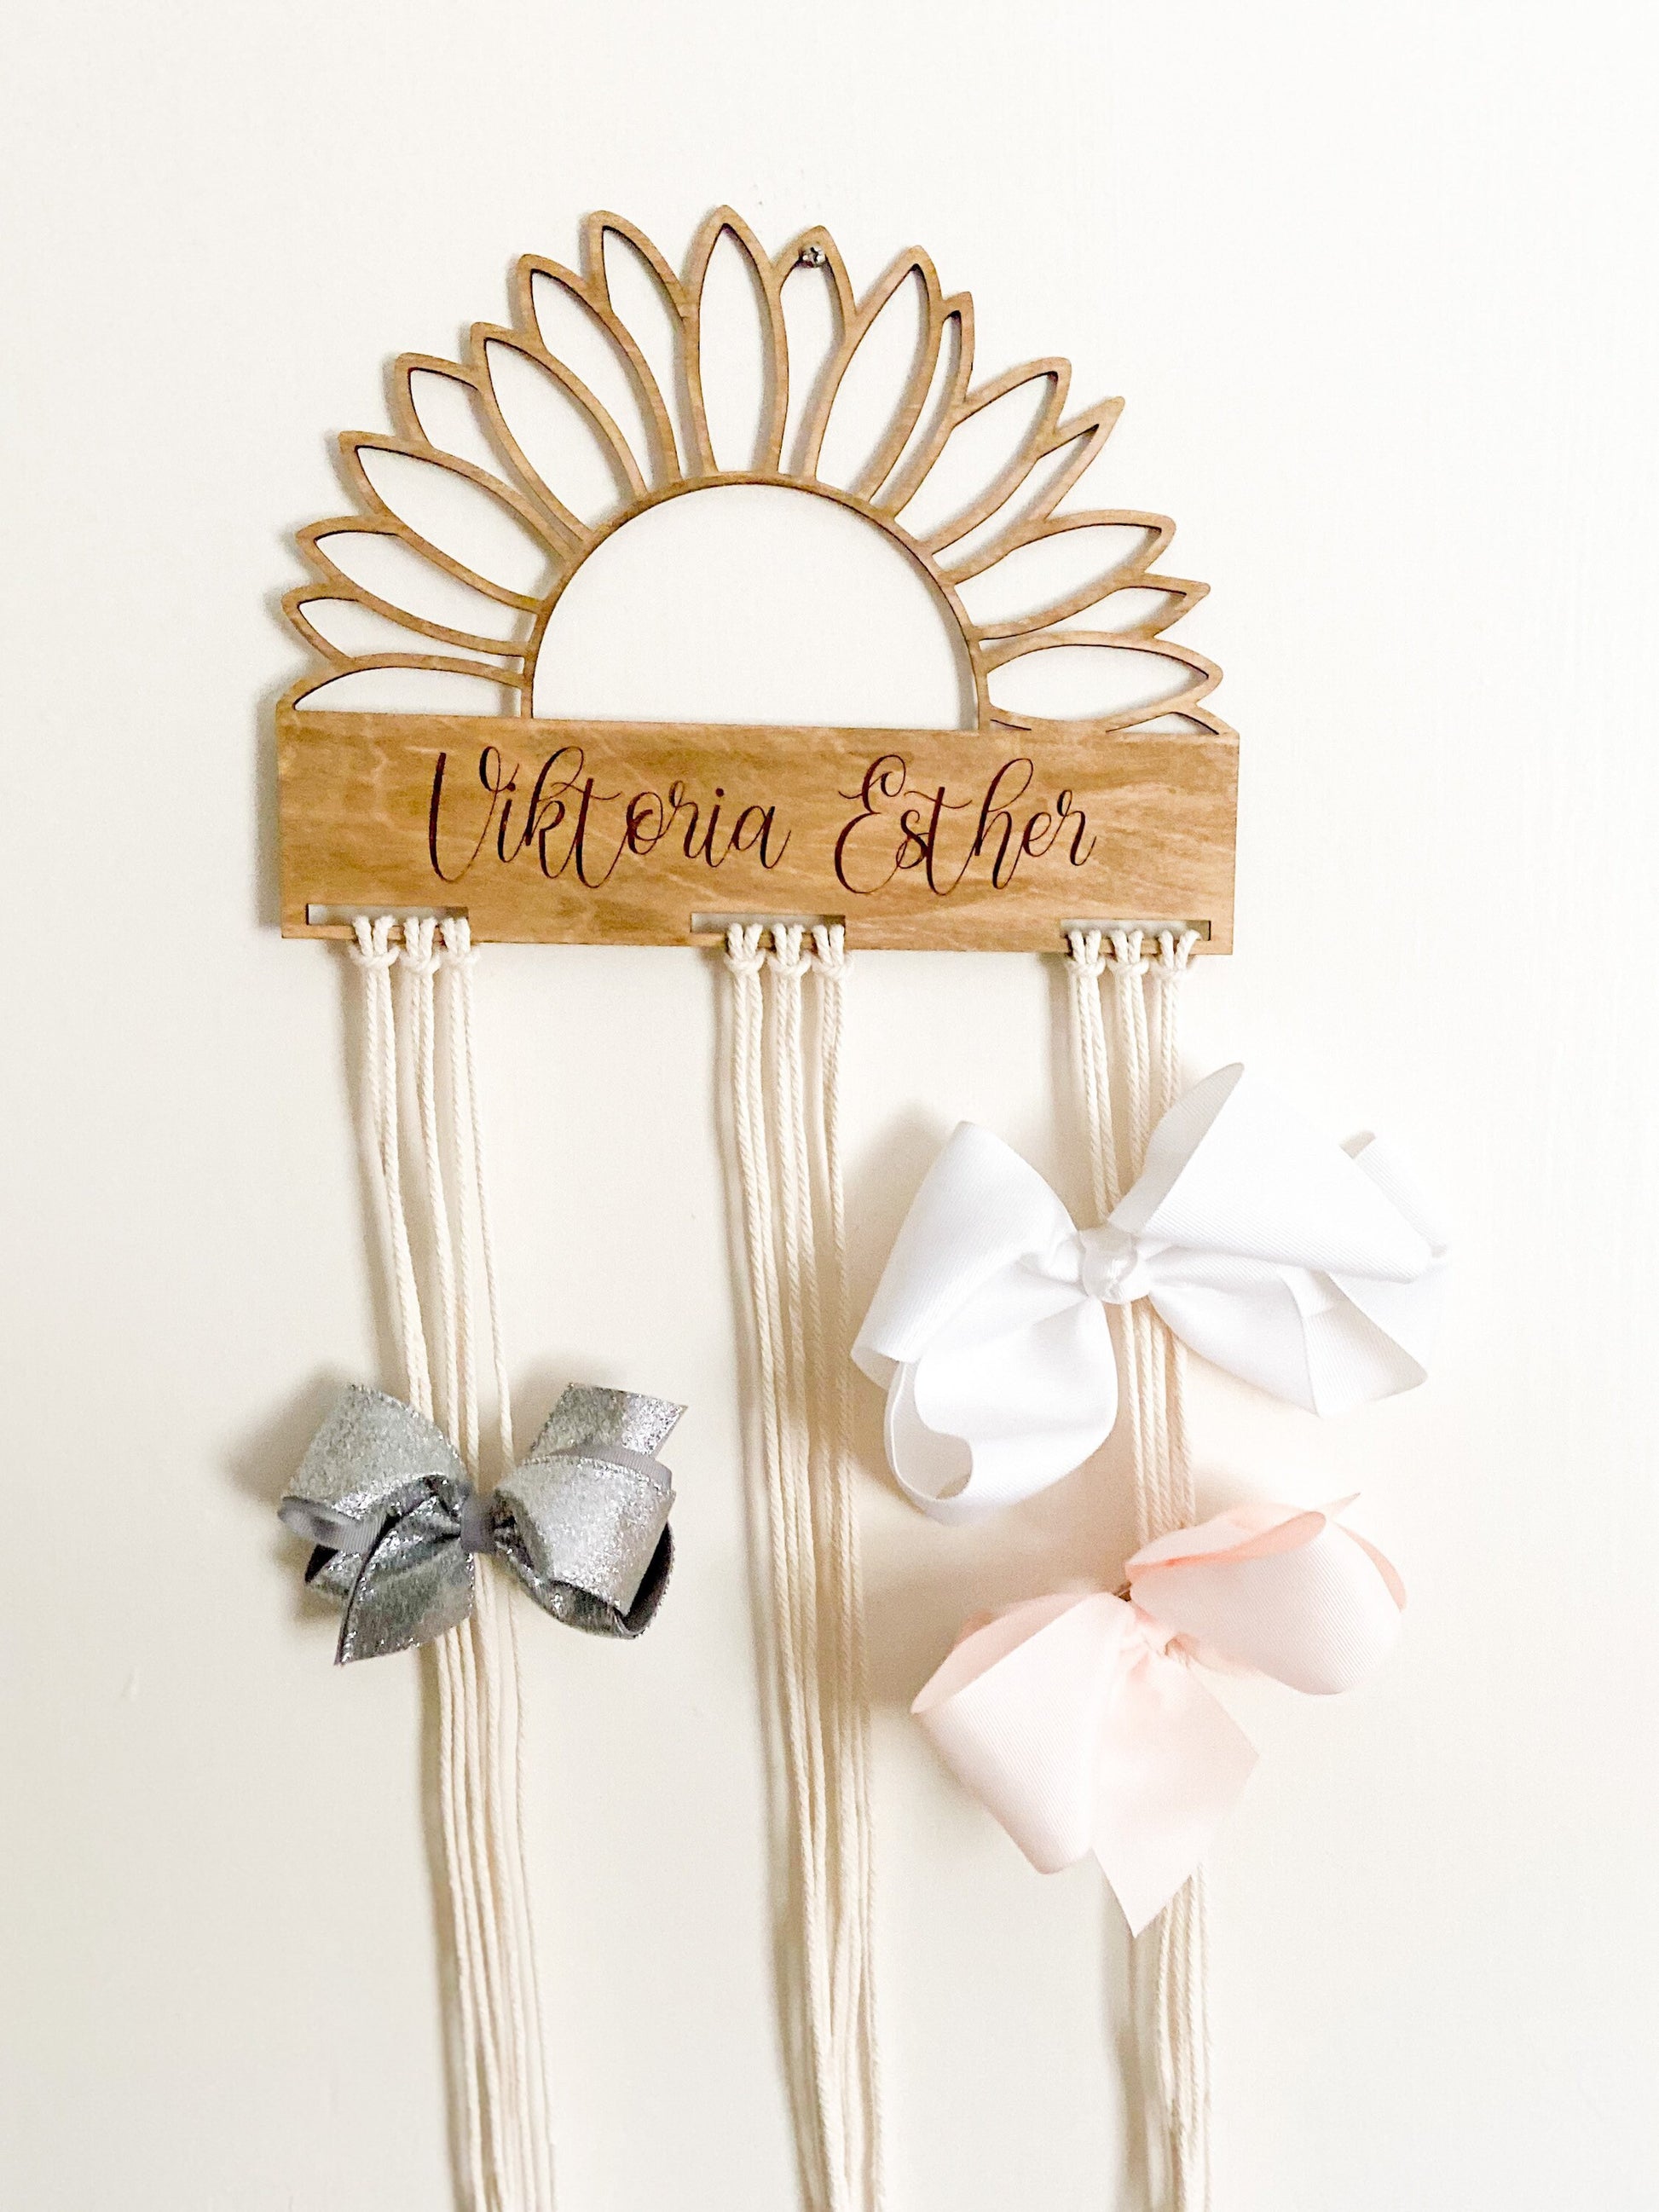 Sunflower Bow Holder | Wood bow holder | Personalizad bow holder